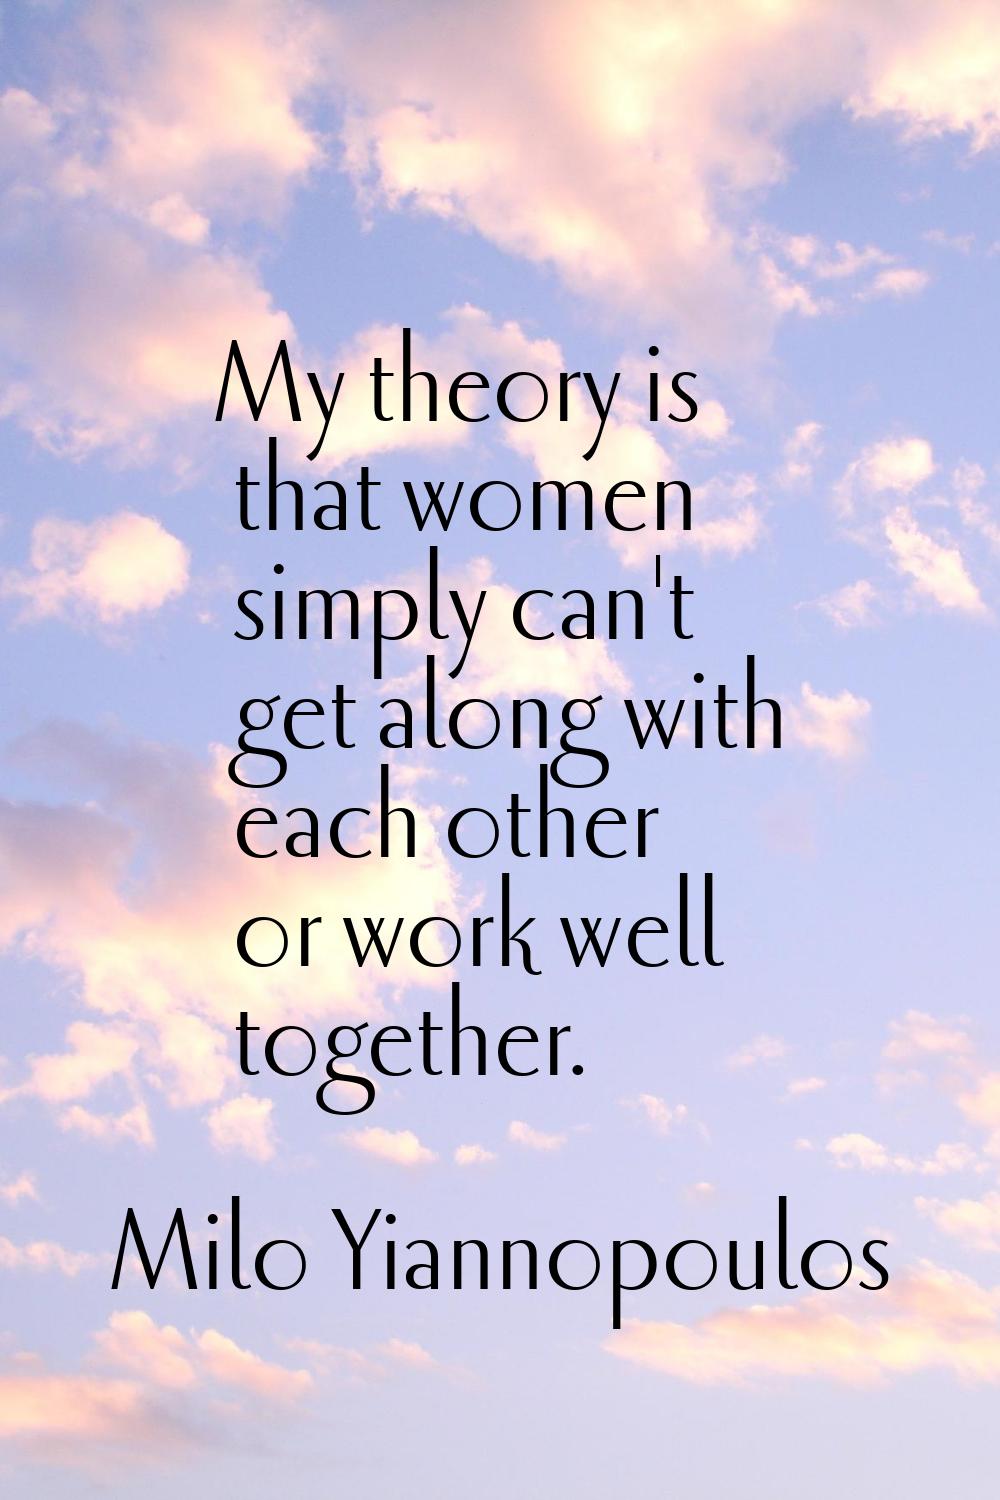 My theory is that women simply can't get along with each other or work well together.